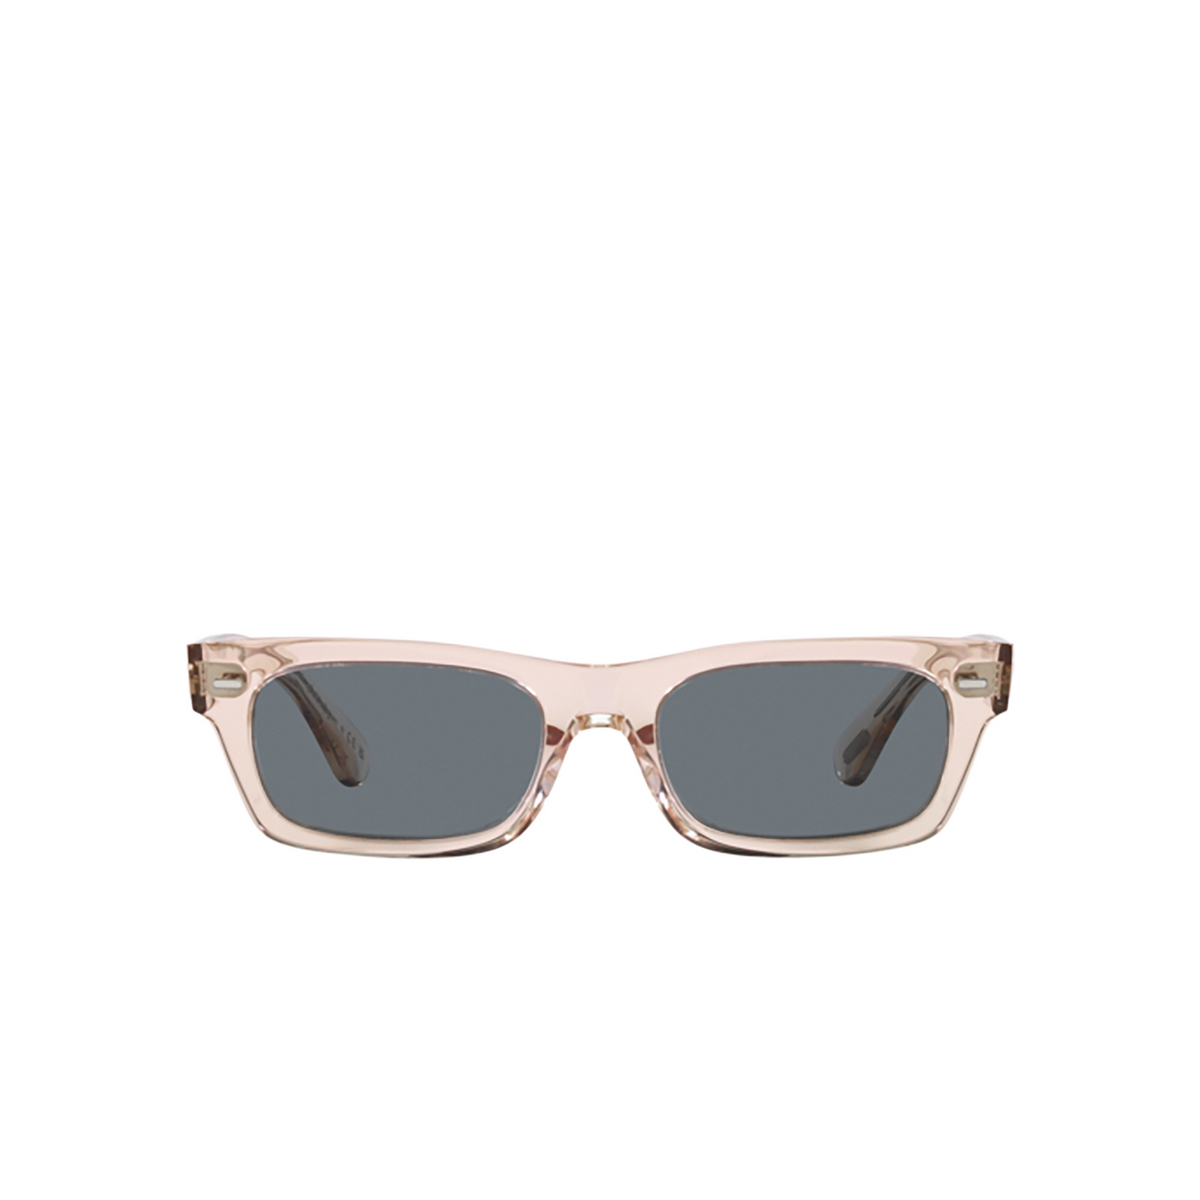 Oliver Peoples DAVRI Sunglasses 1743R8 Cherry Blossom - front view